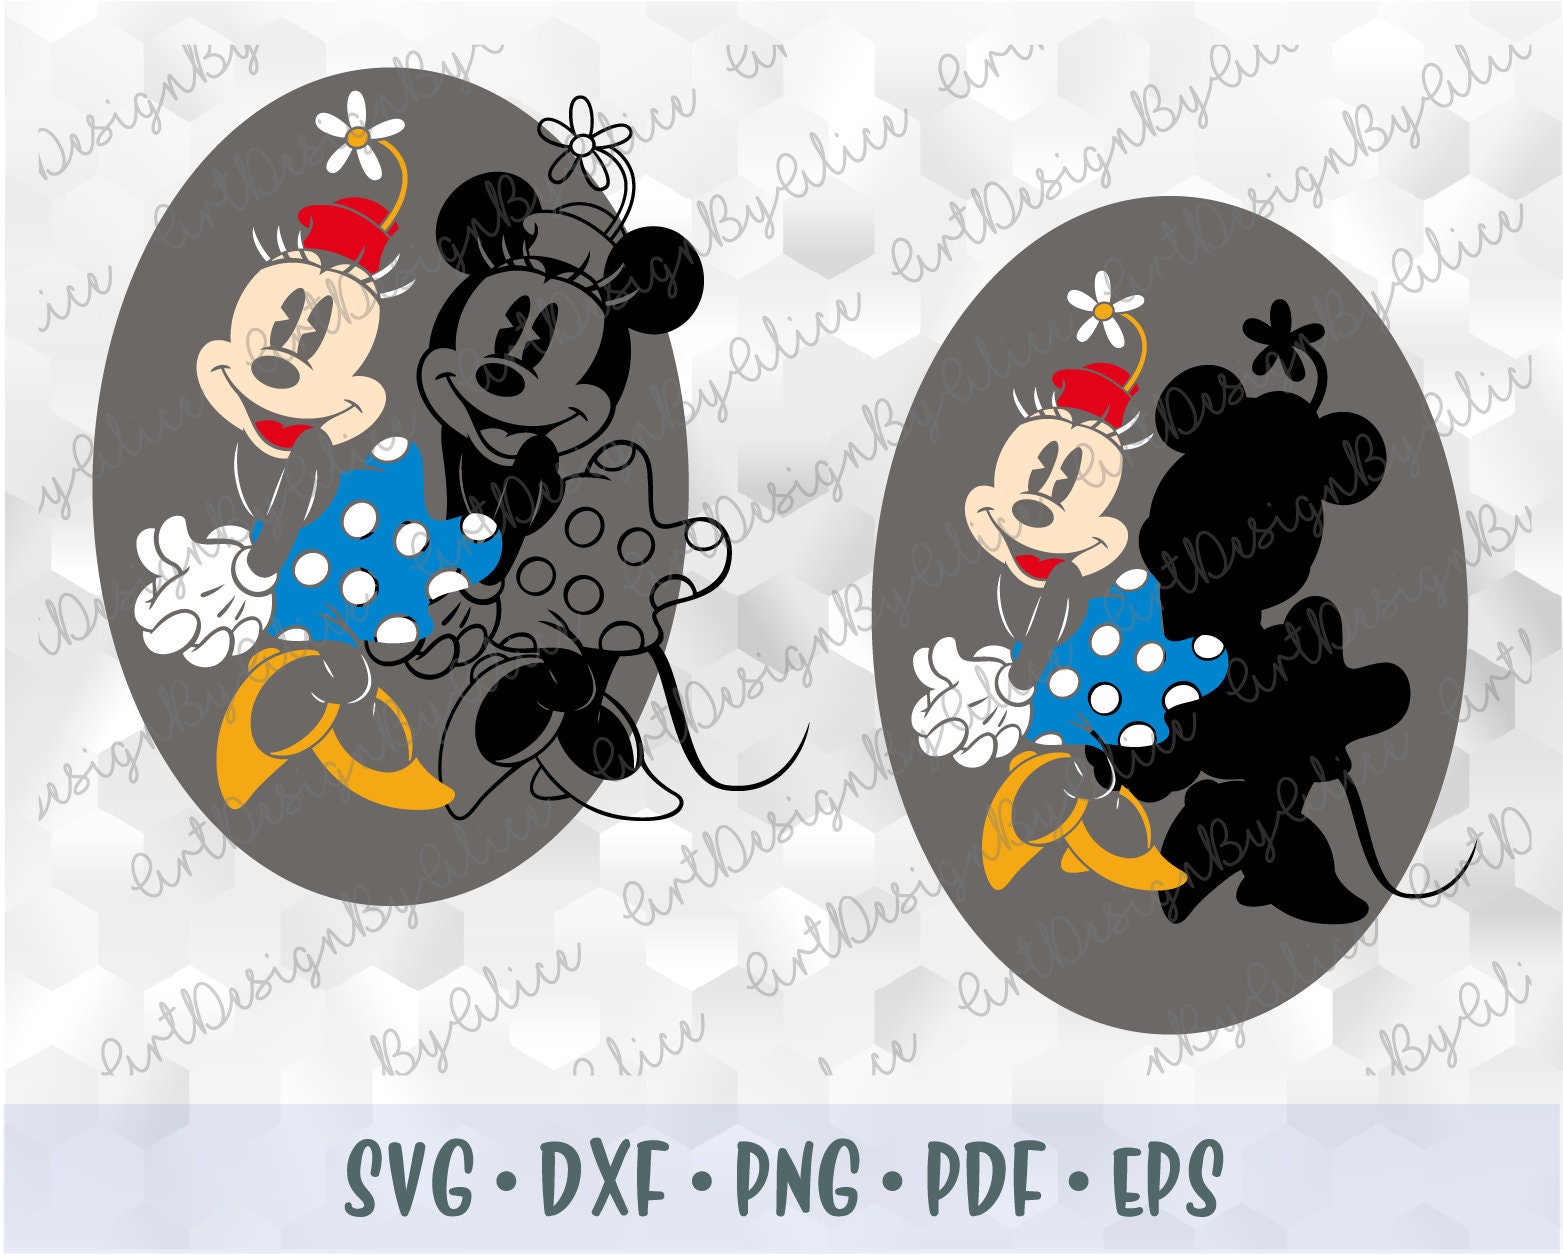 SVG PNG DXF Mickey Minnie Mouse Vintage Retro Old Style Etsy